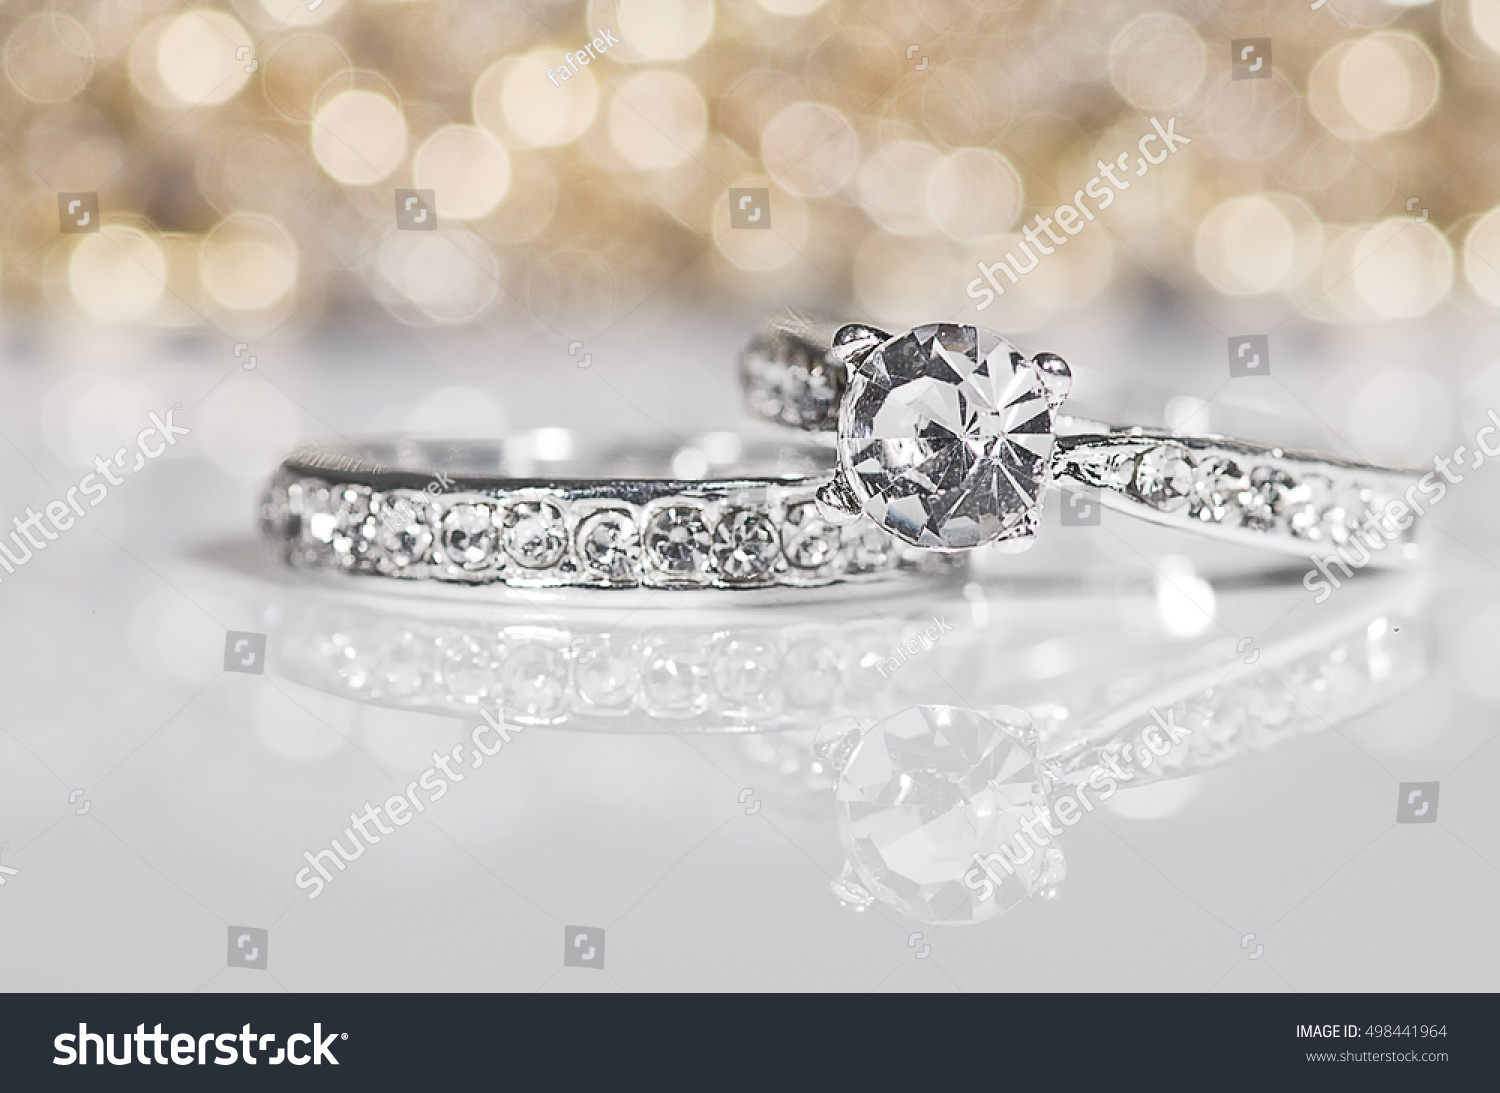 Silver Rings with diamonds on the white surface with golden reflections in the background. #498441964